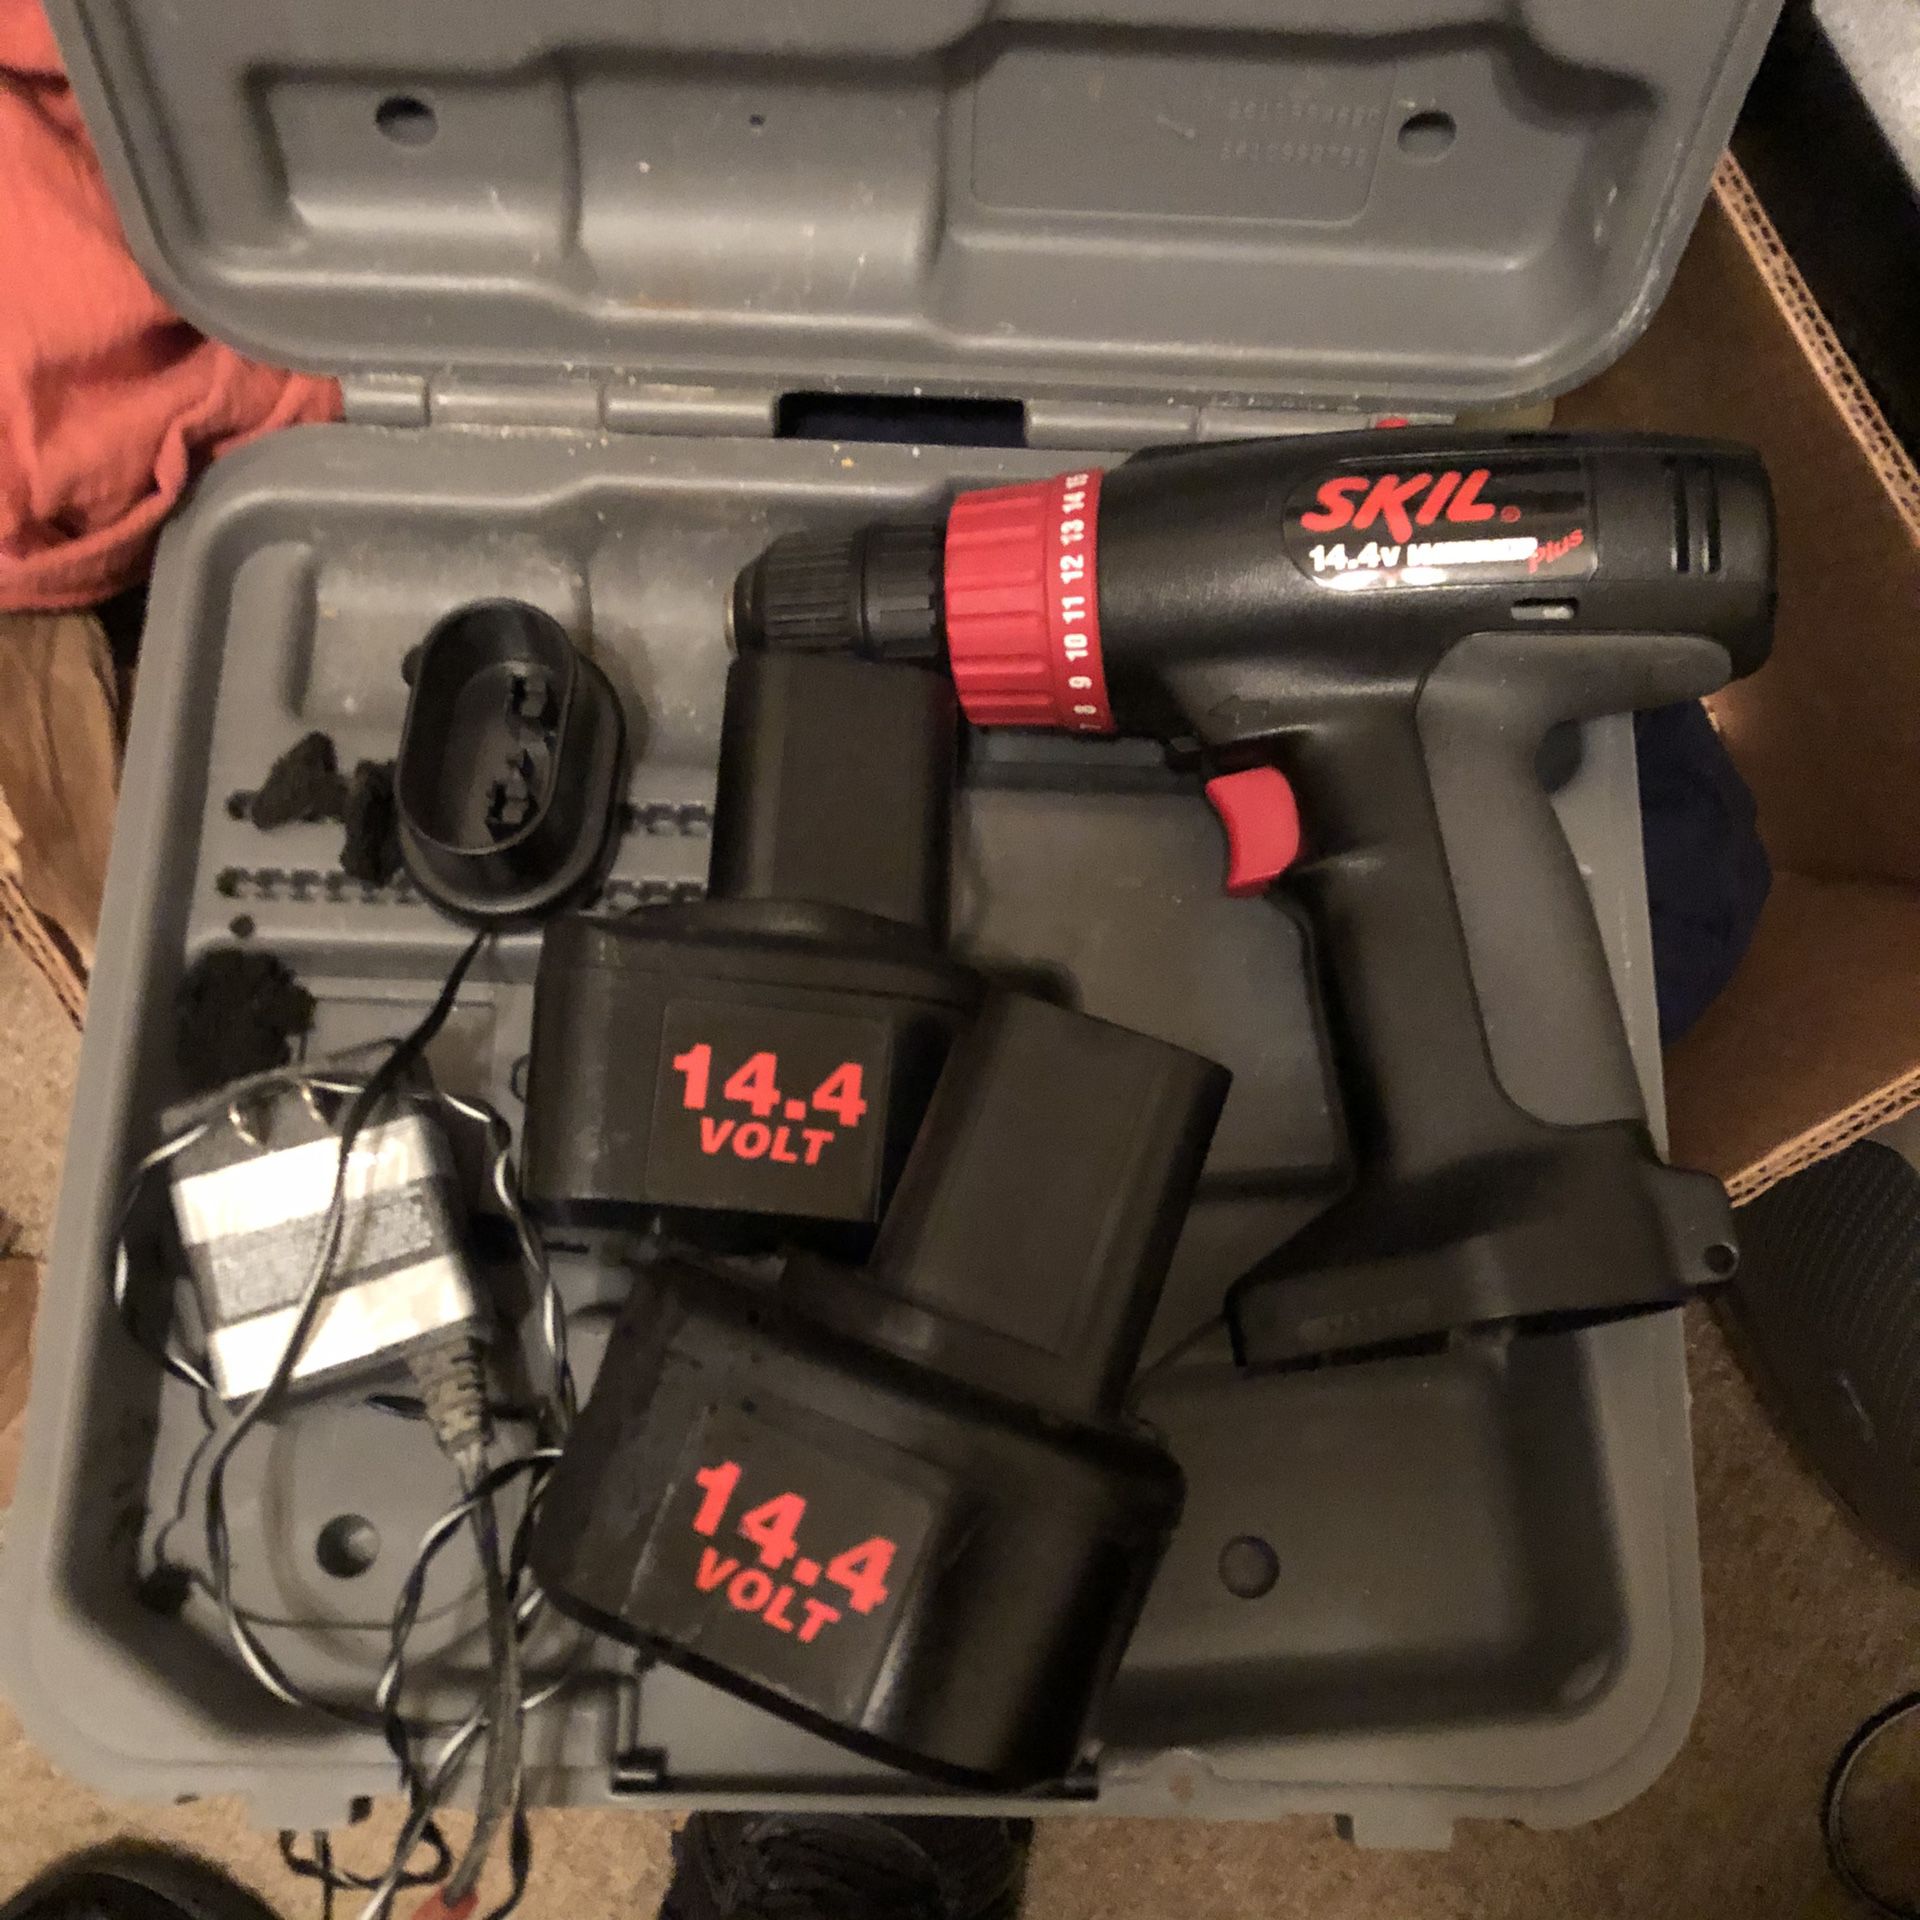 Skil Drill 14.4v- AC charger not working